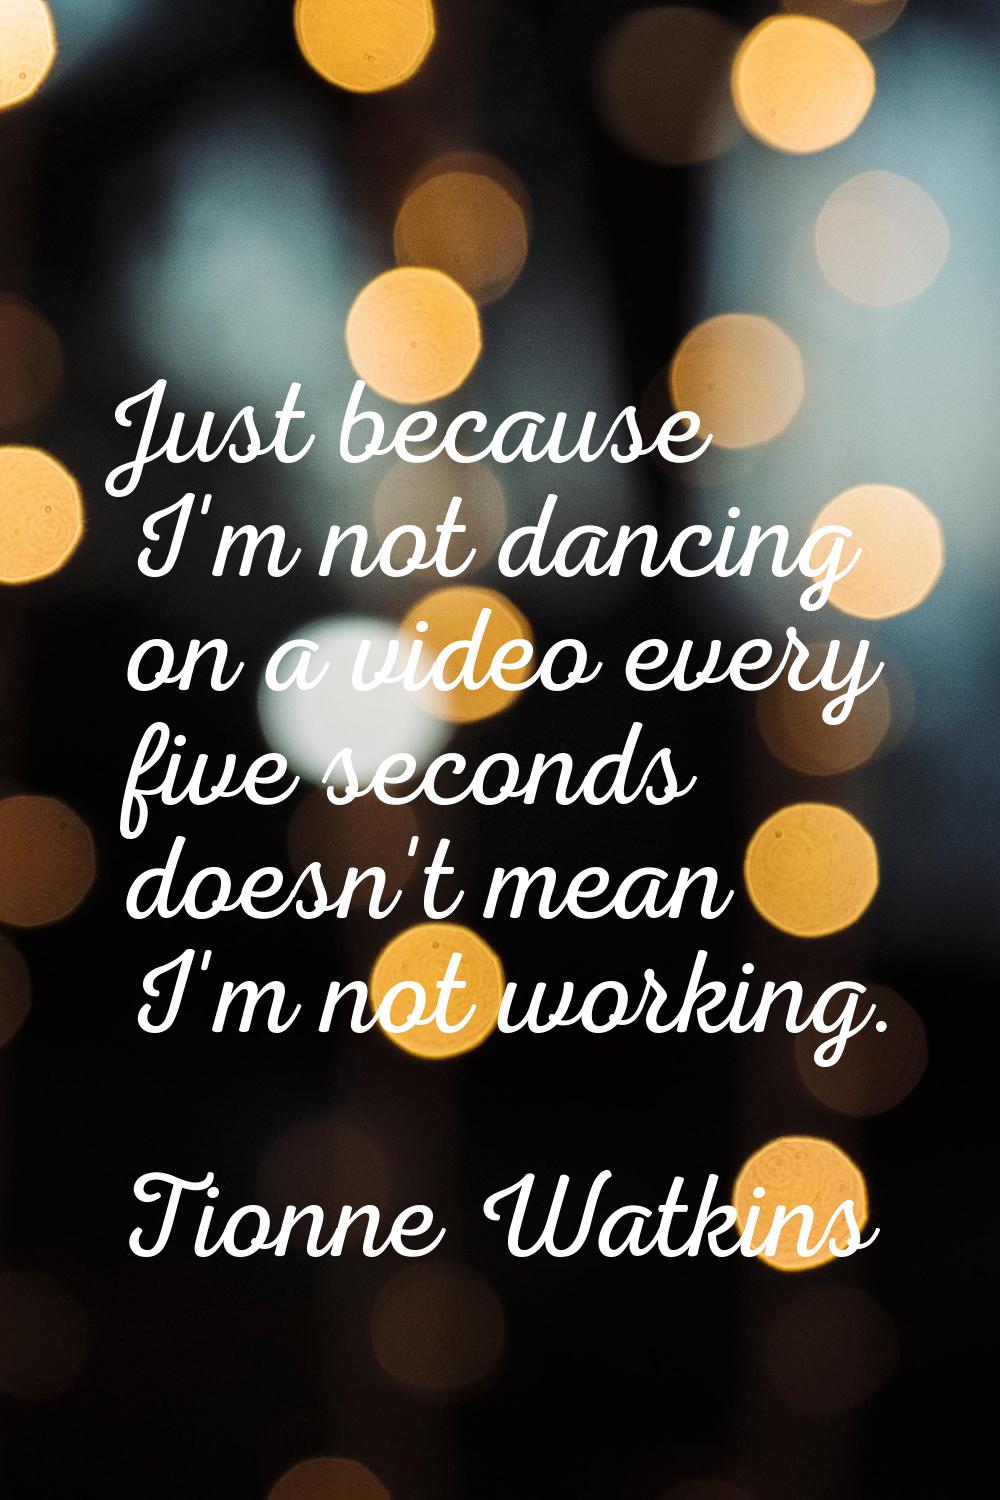 Just because I'm not dancing on a video every five seconds doesn't mean I'm not working.